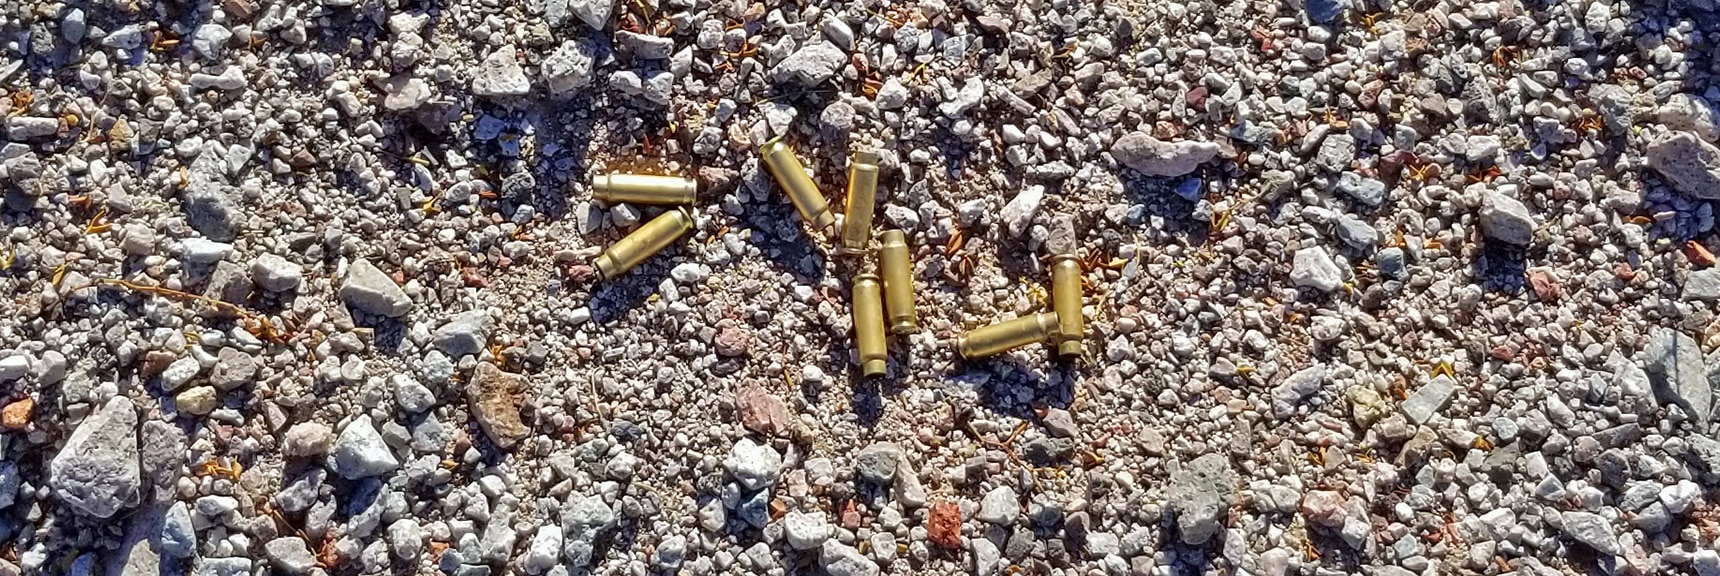 Spent Bullet Casings at Base of "No Shooting Allowed" Sign | Fortification Hill | Lake Mead National Recreation Area, Arizona